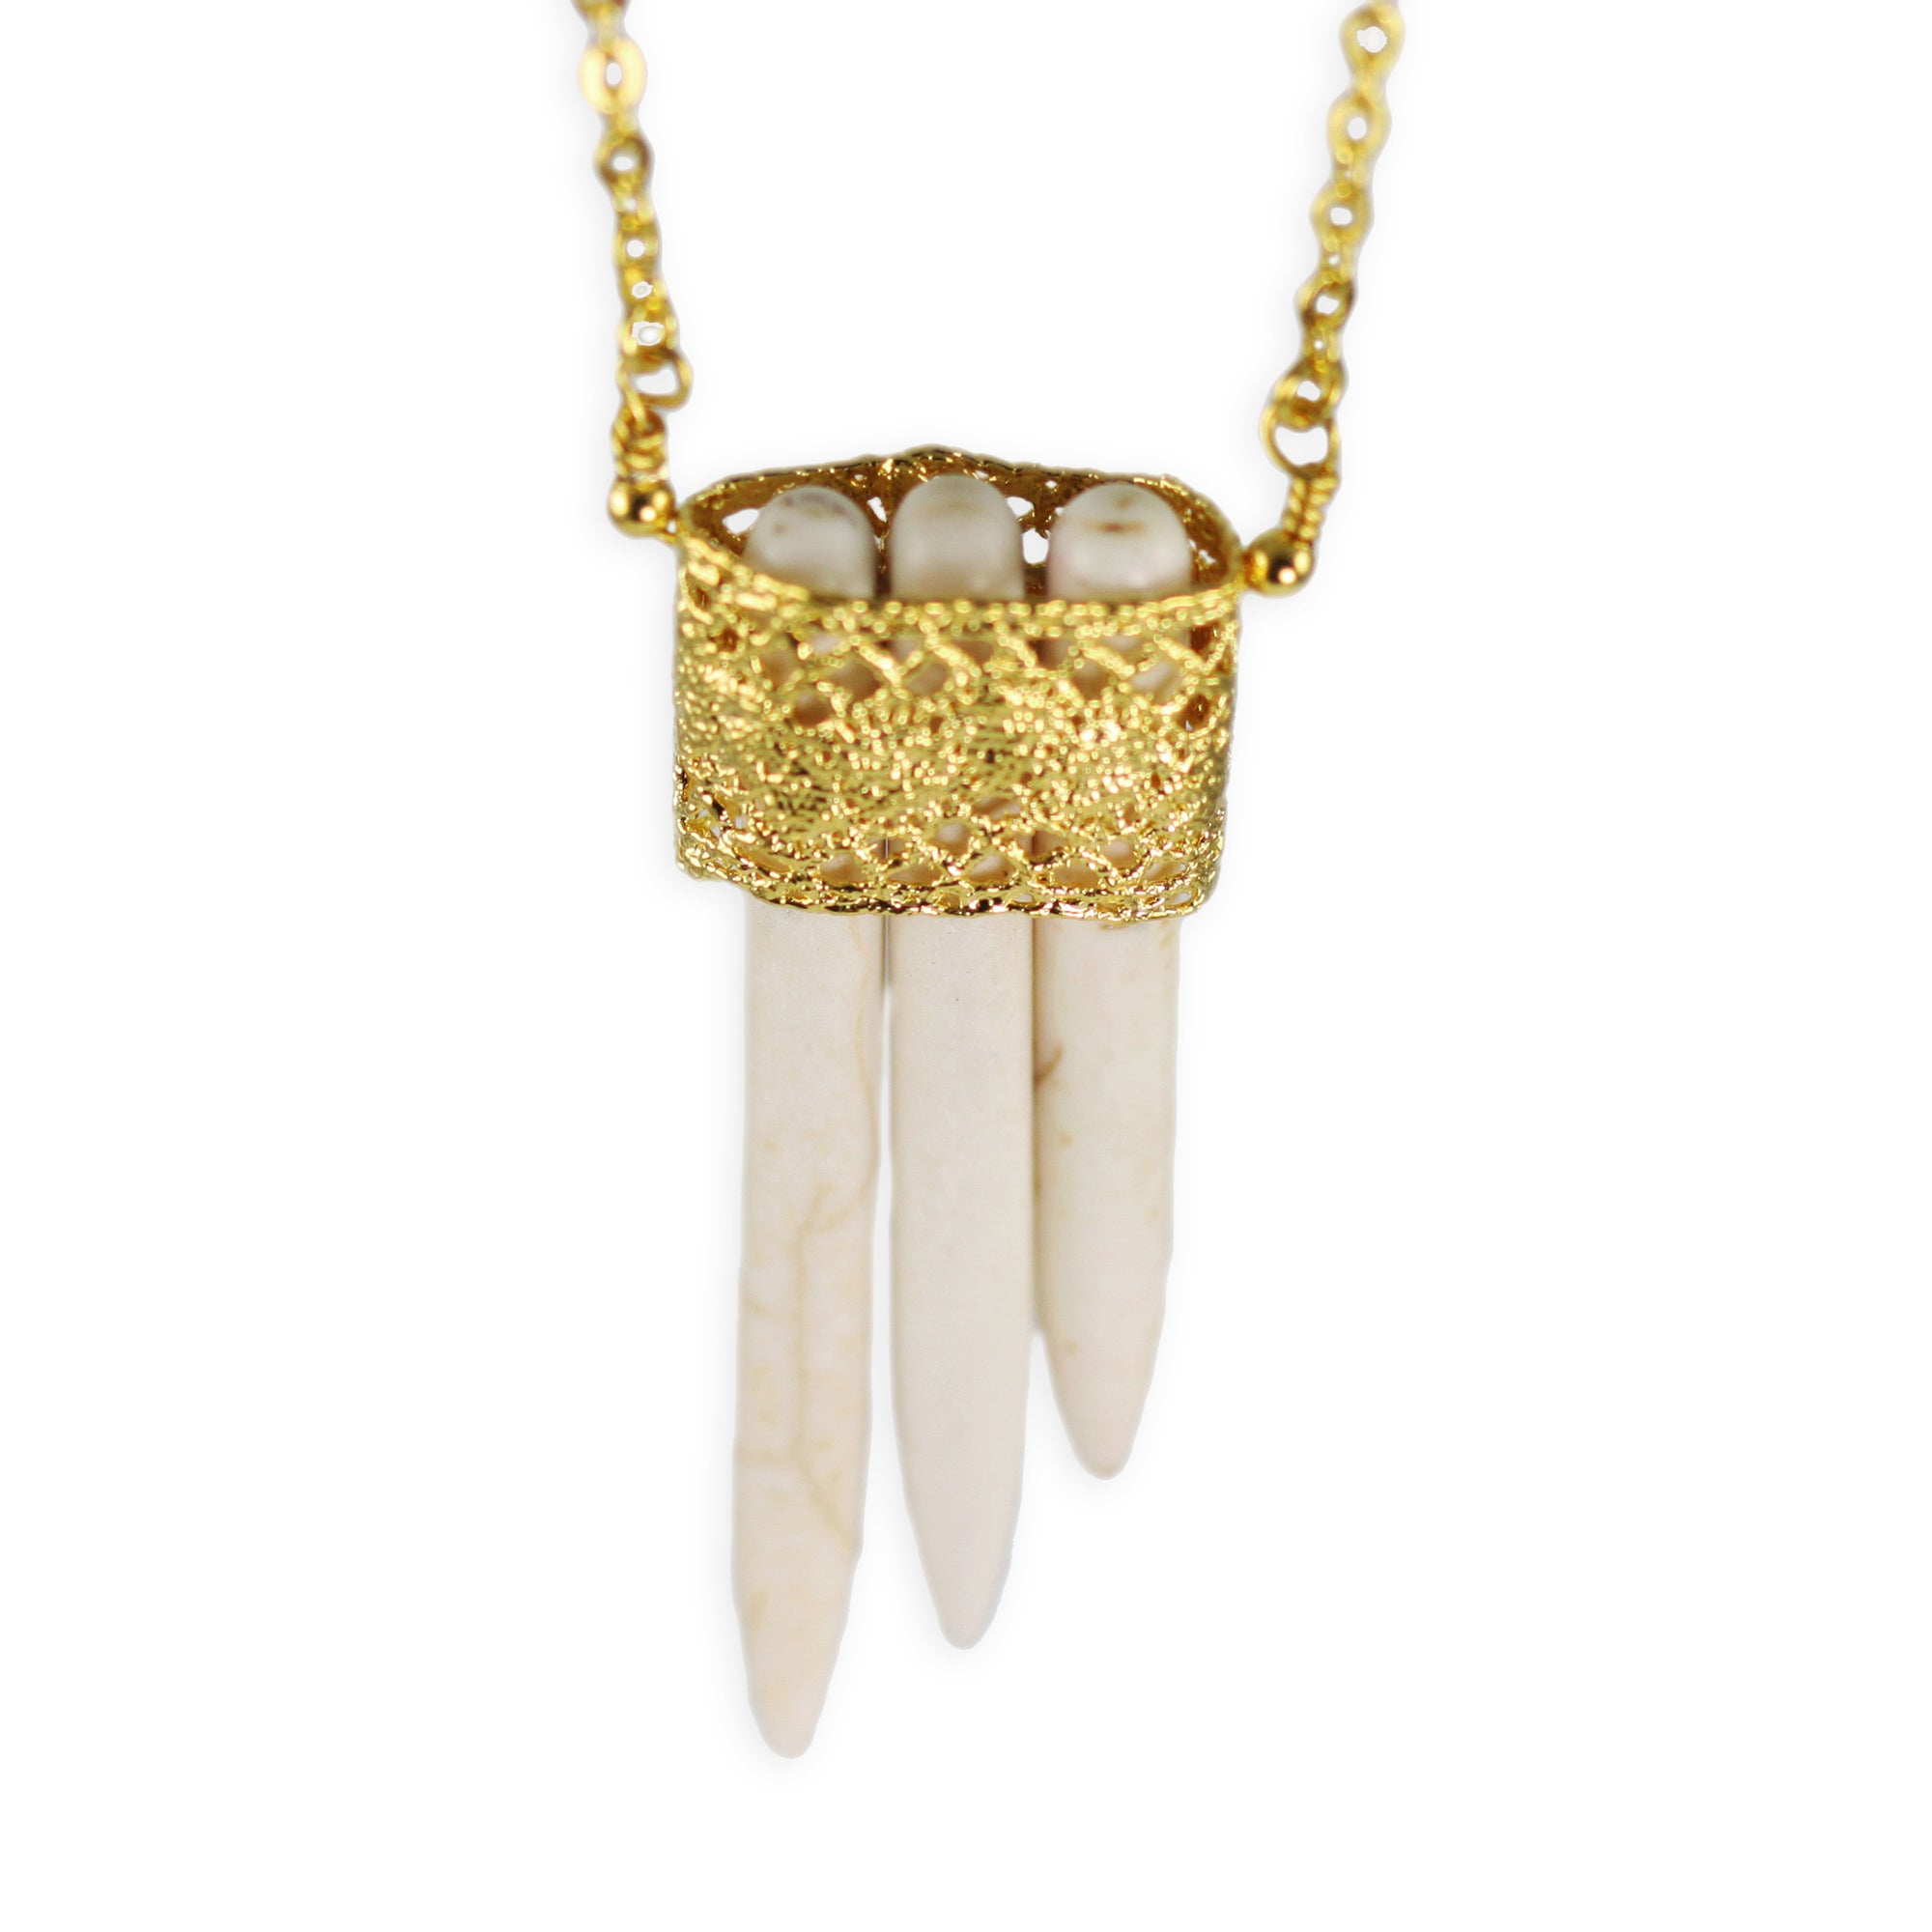 Lace and white turquoise necklace in 24k gold.